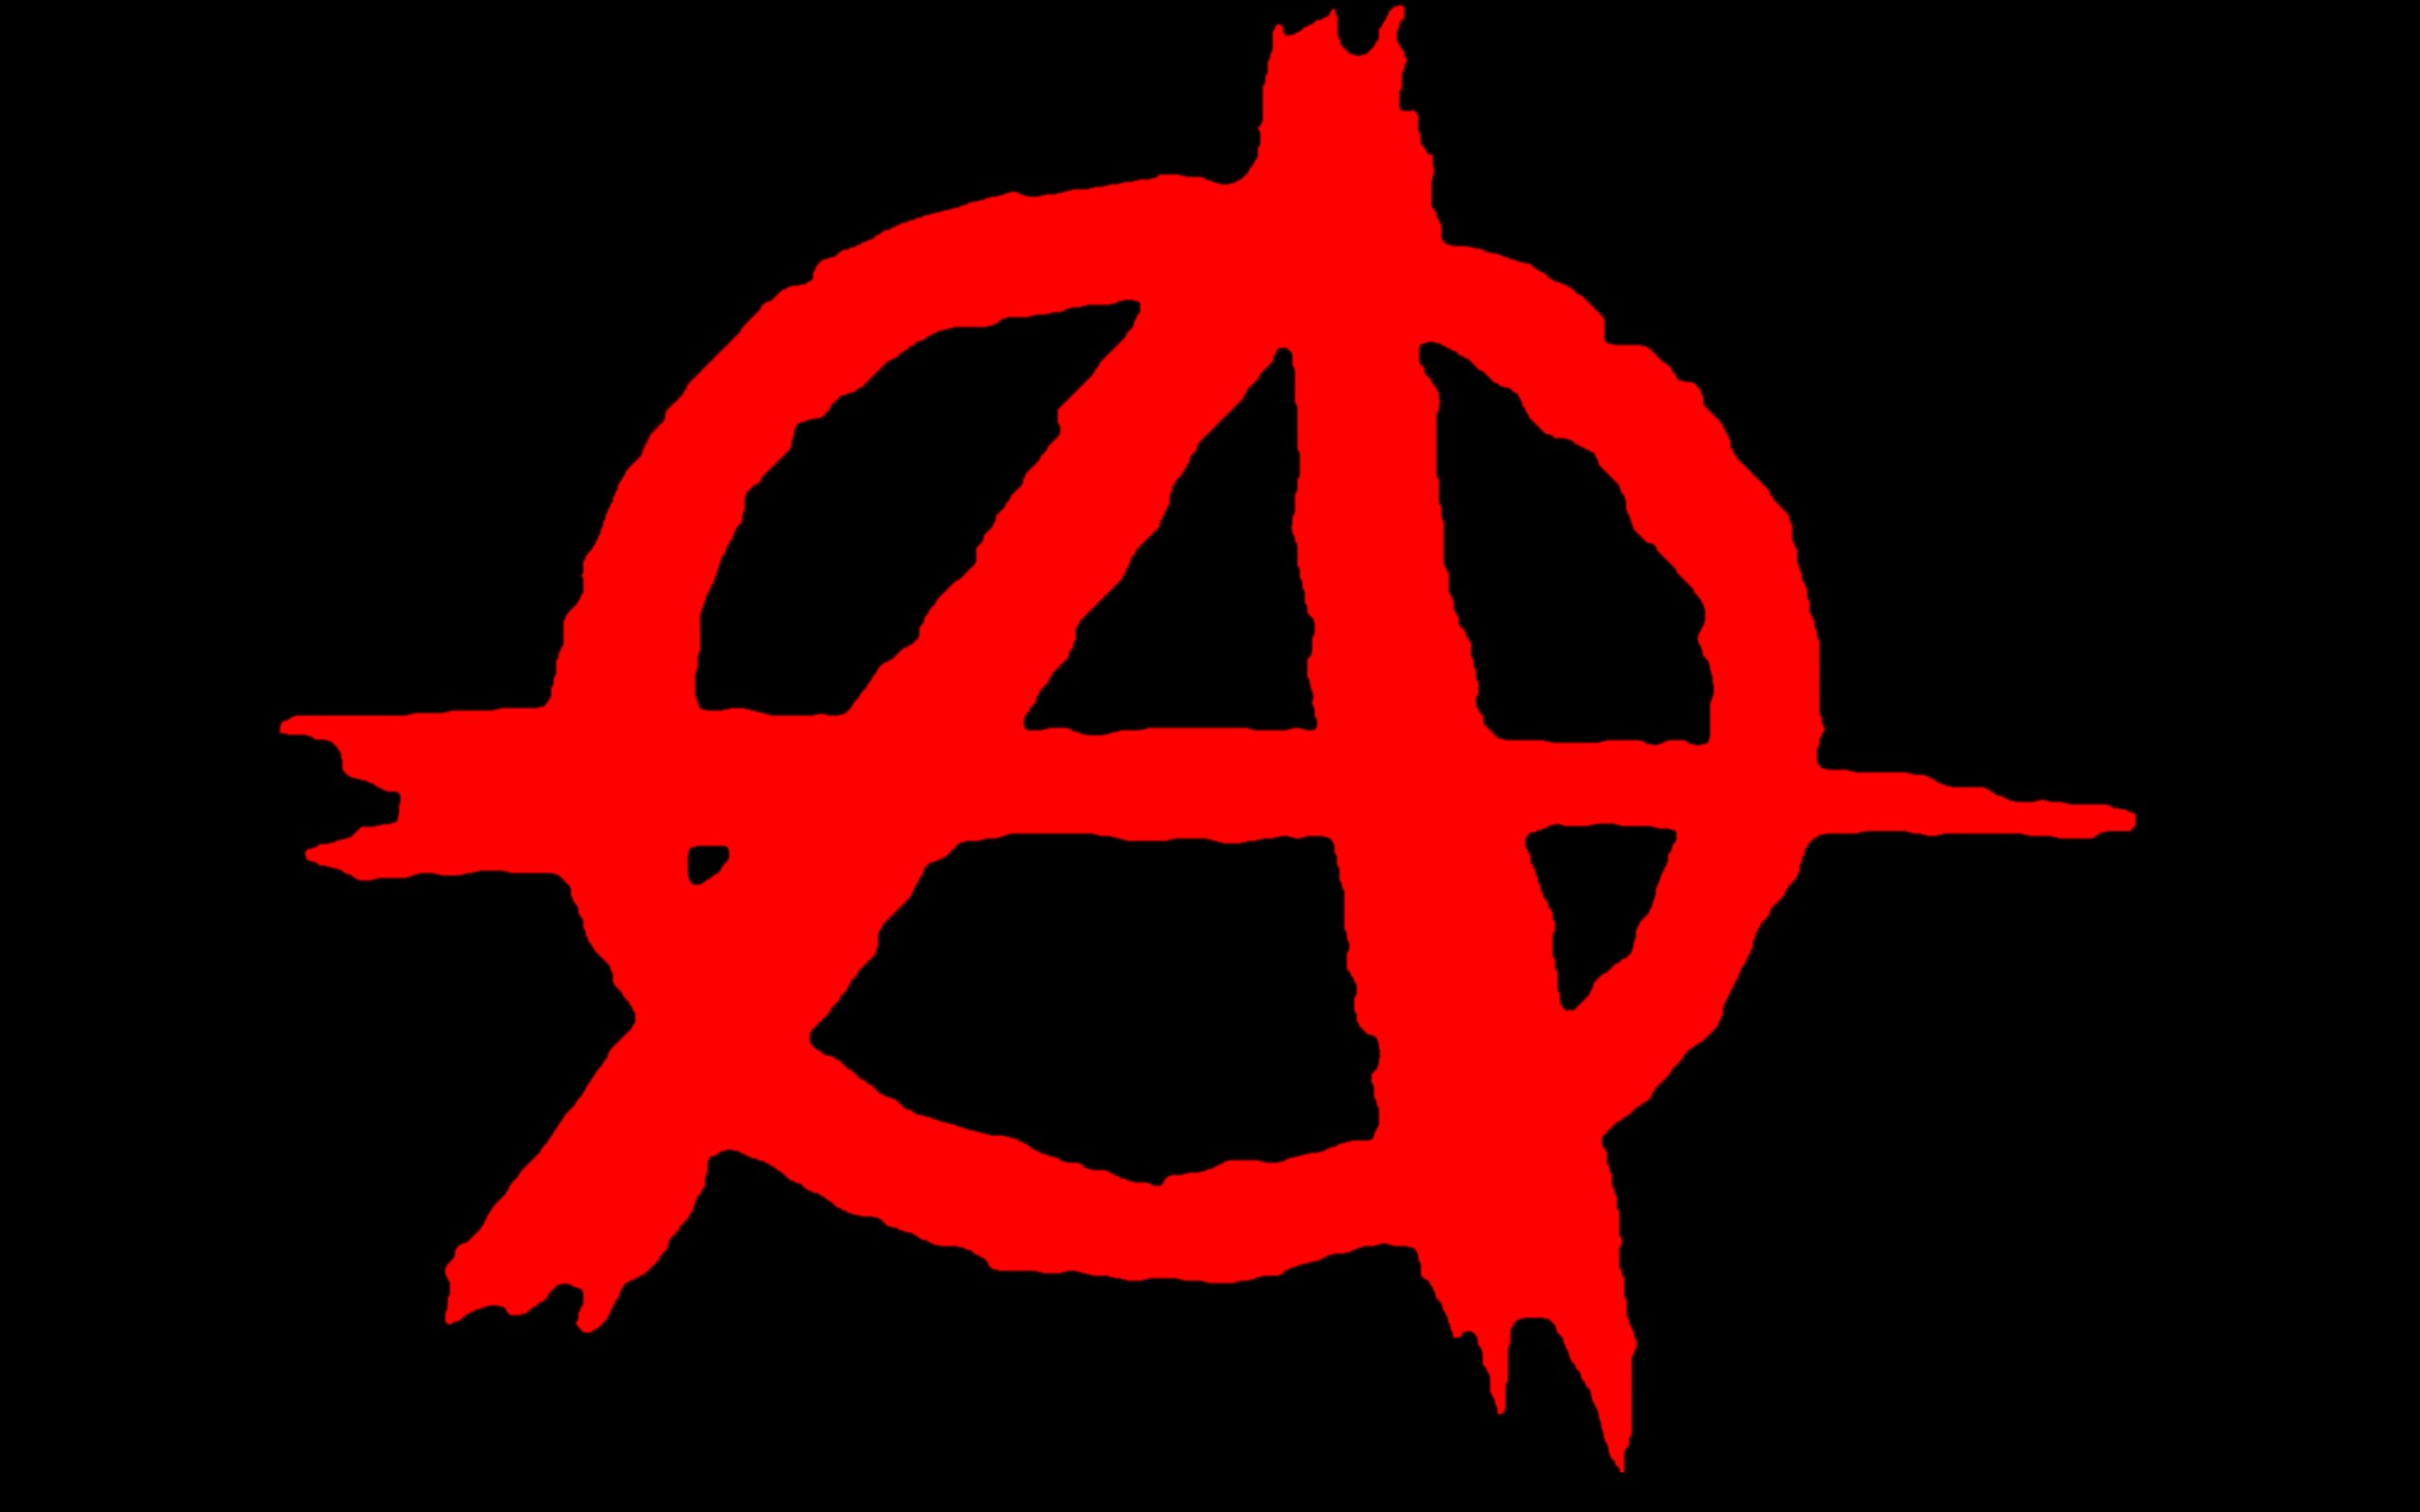 Signs Symbol Peace Anarchy Dom Sign Anarchism Wallpaper